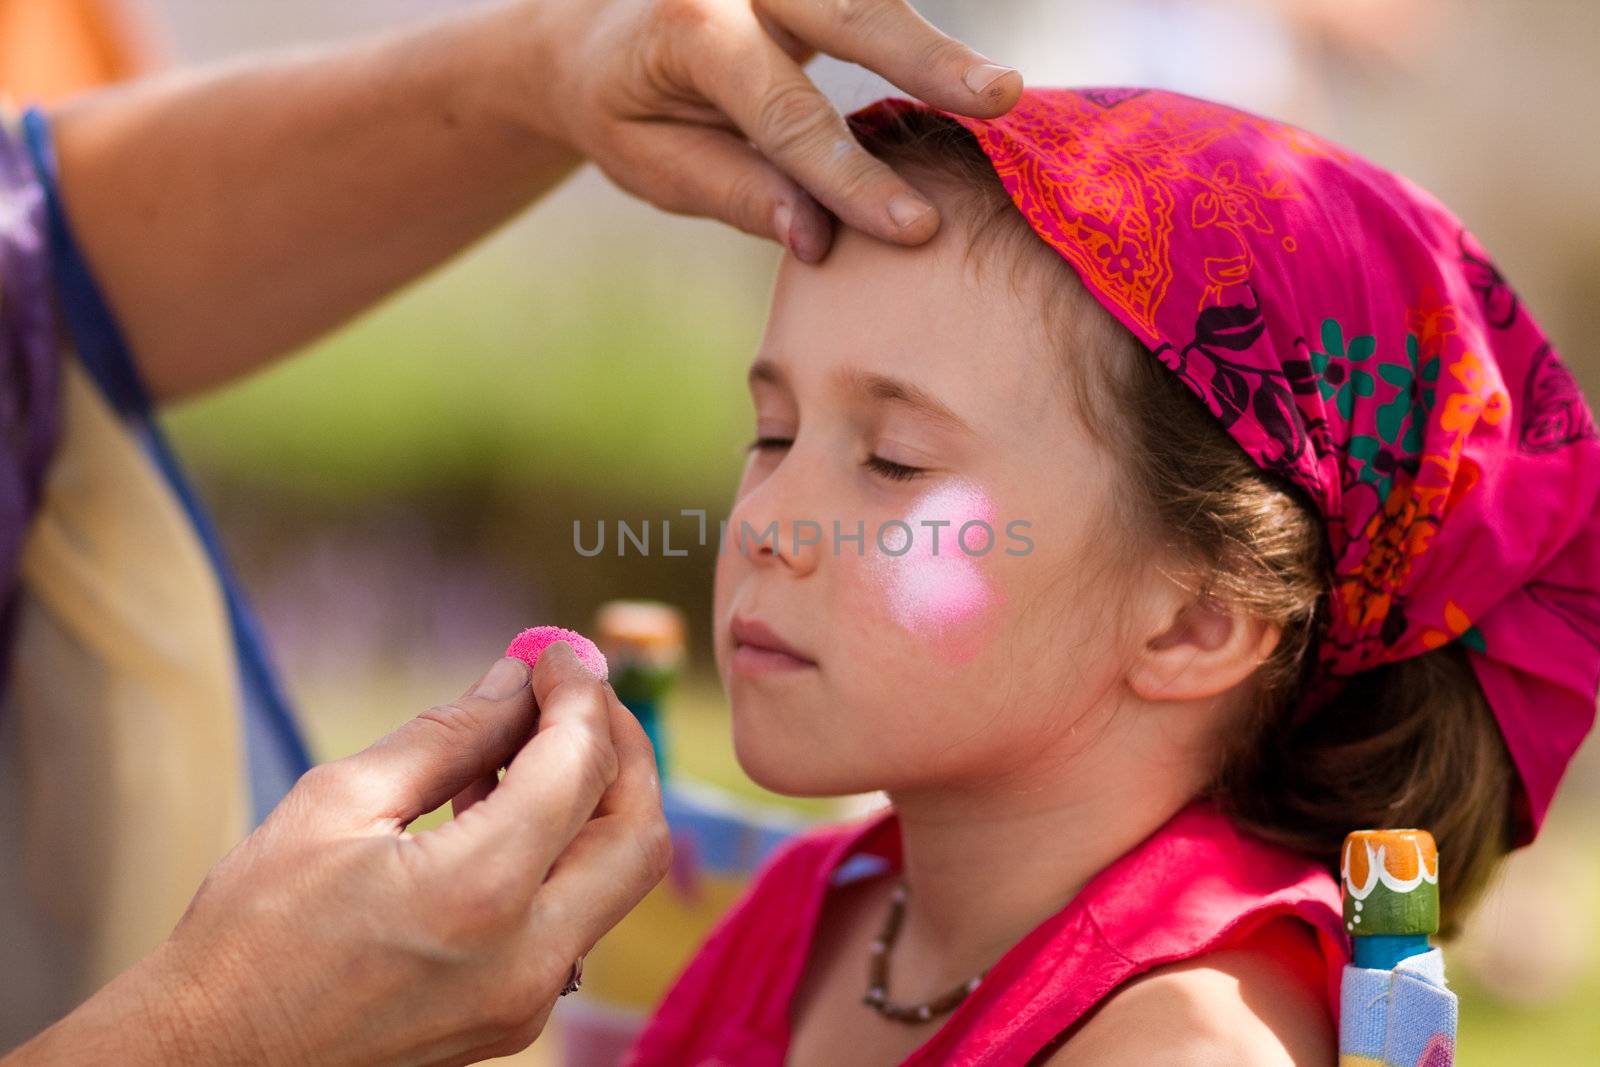 Cute little girl getting make-up on her face